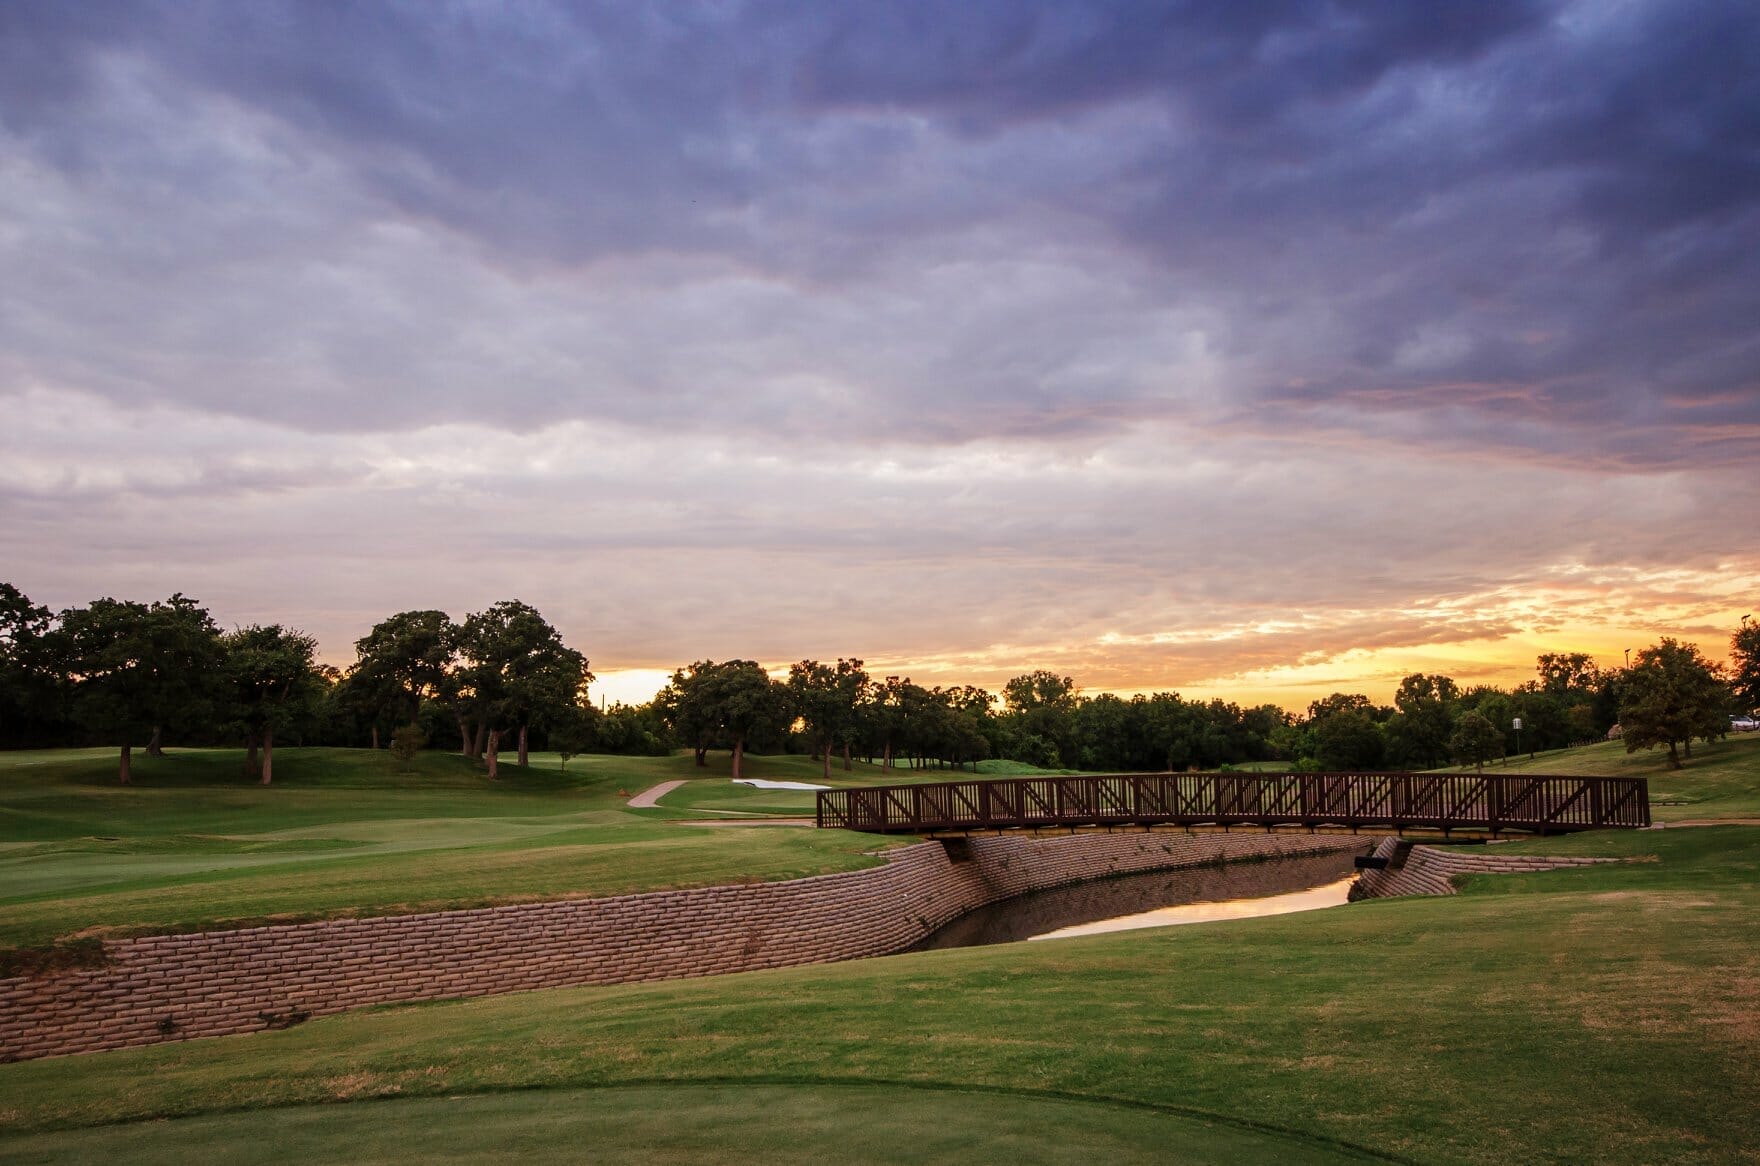 The Texas Star Golf Course In Euless, Texas